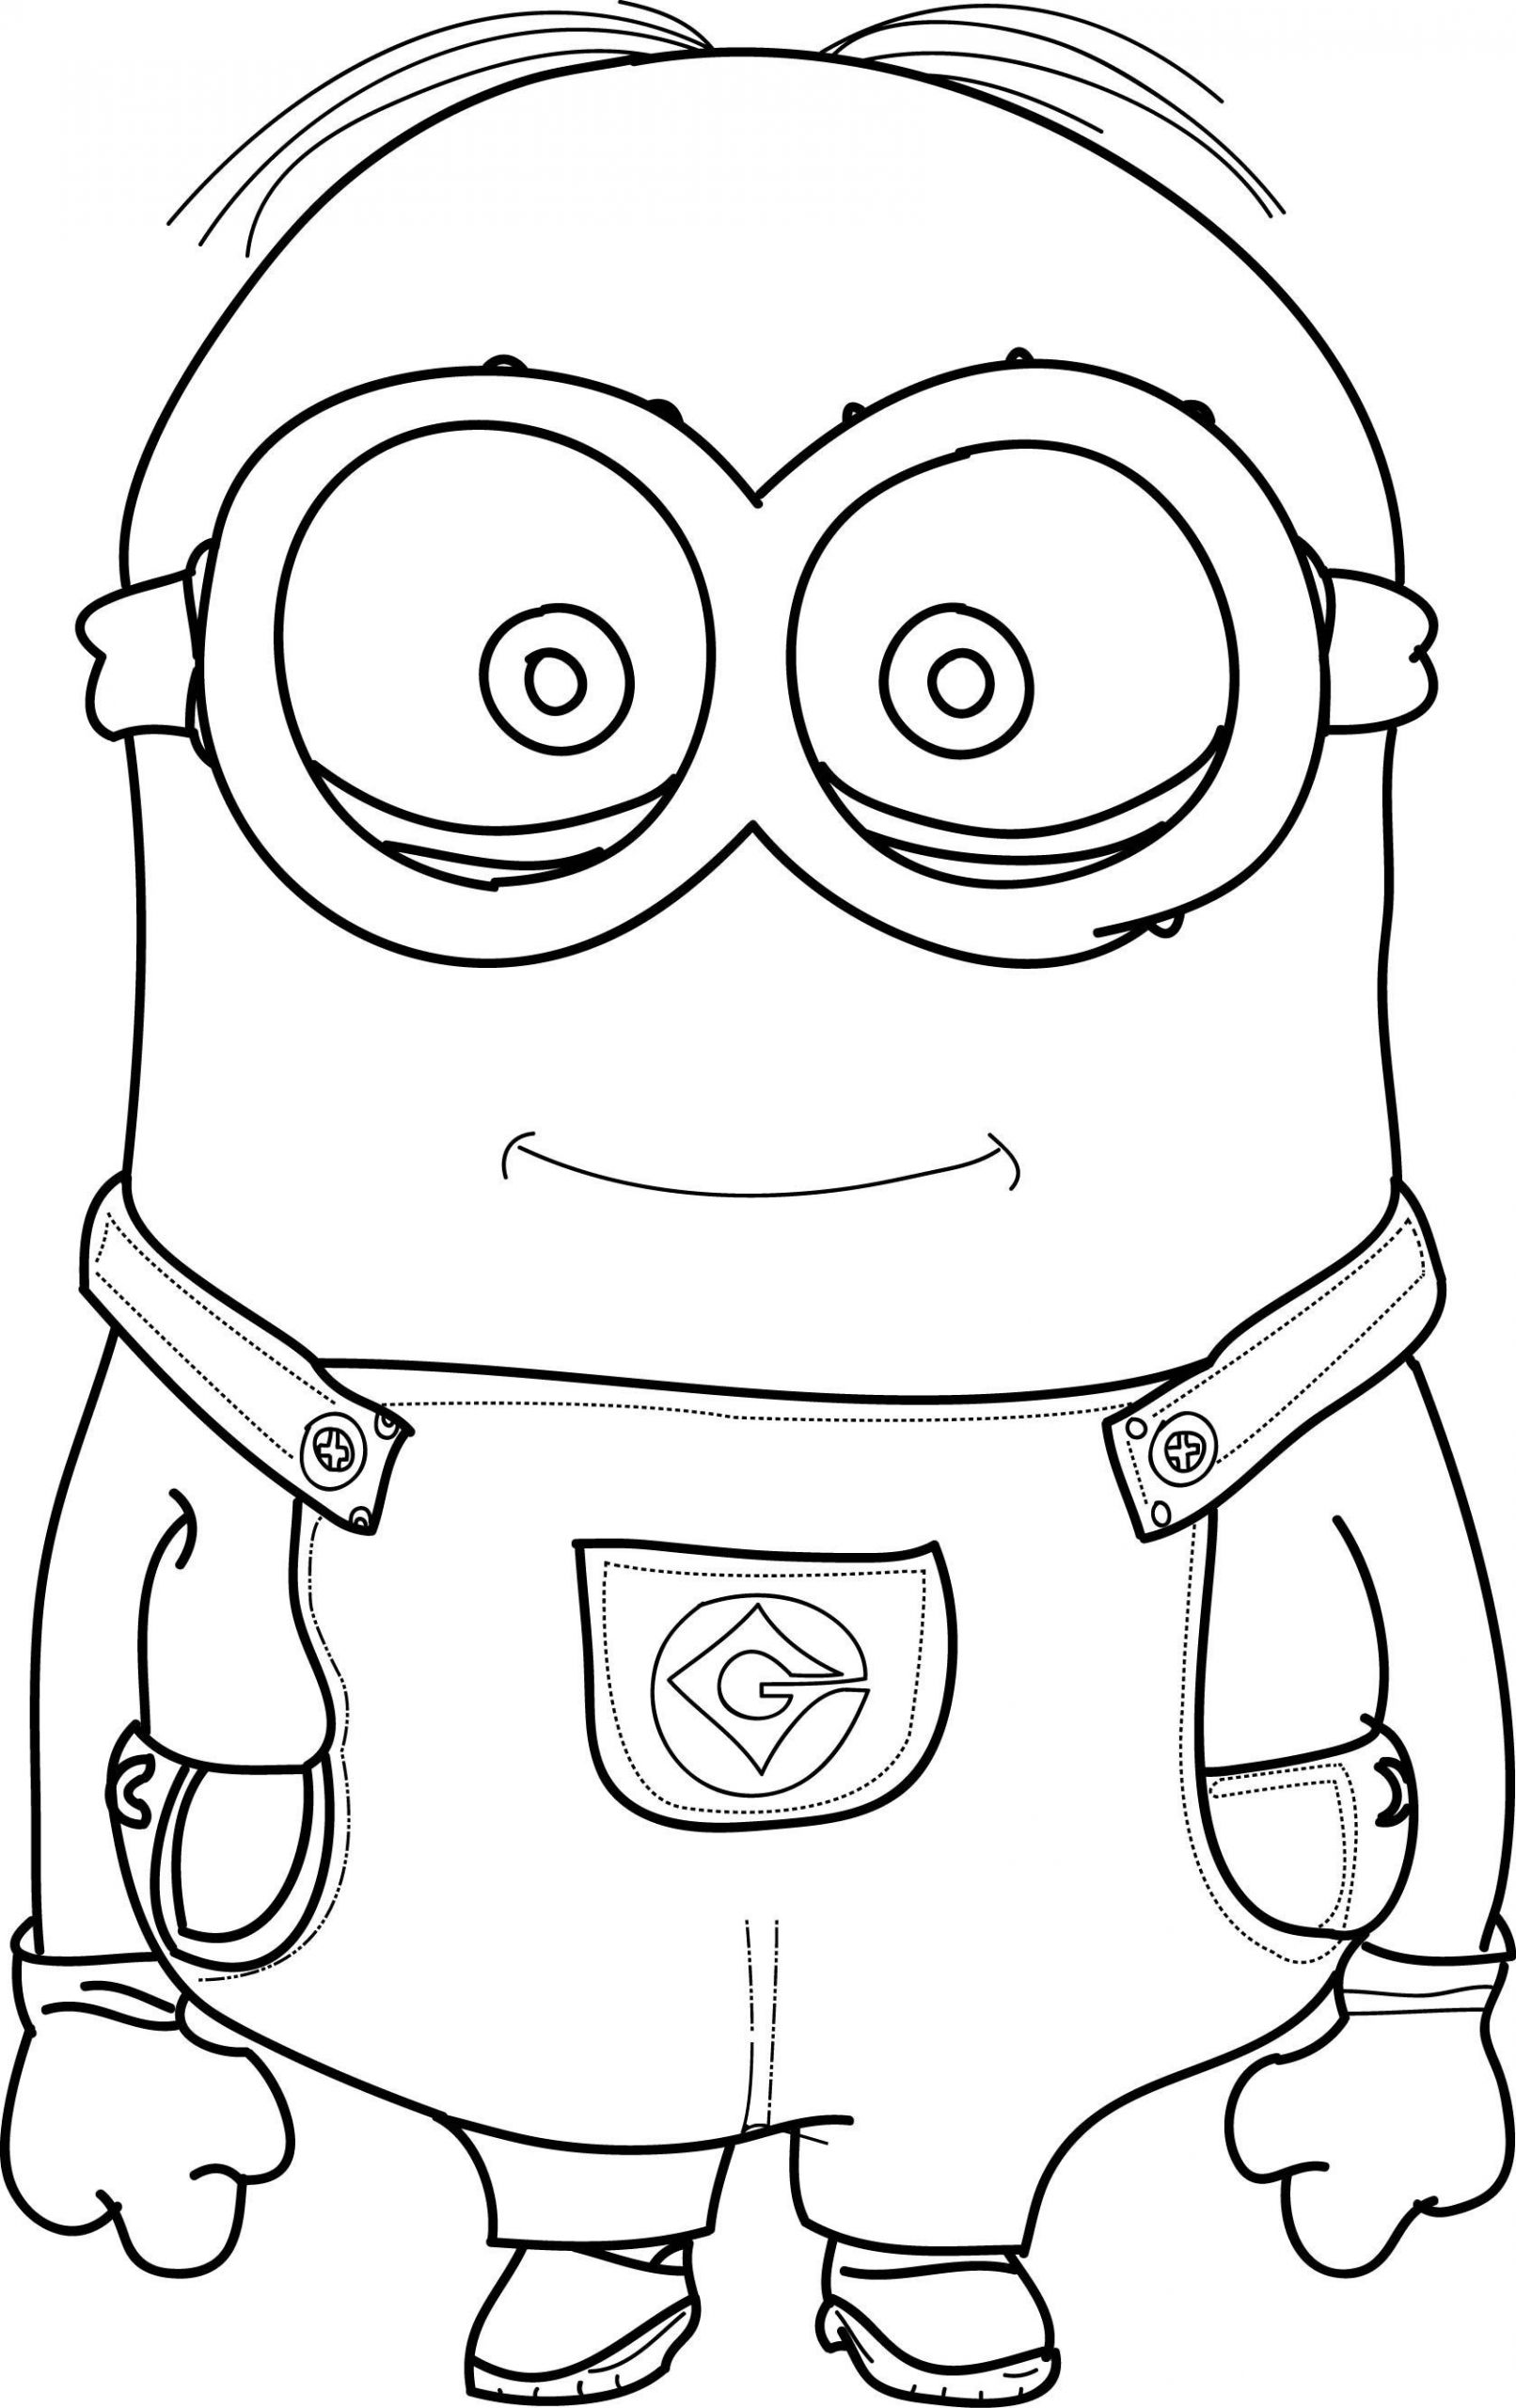 Cool Coloring Pages For Boys
 Minions Coloring Pages